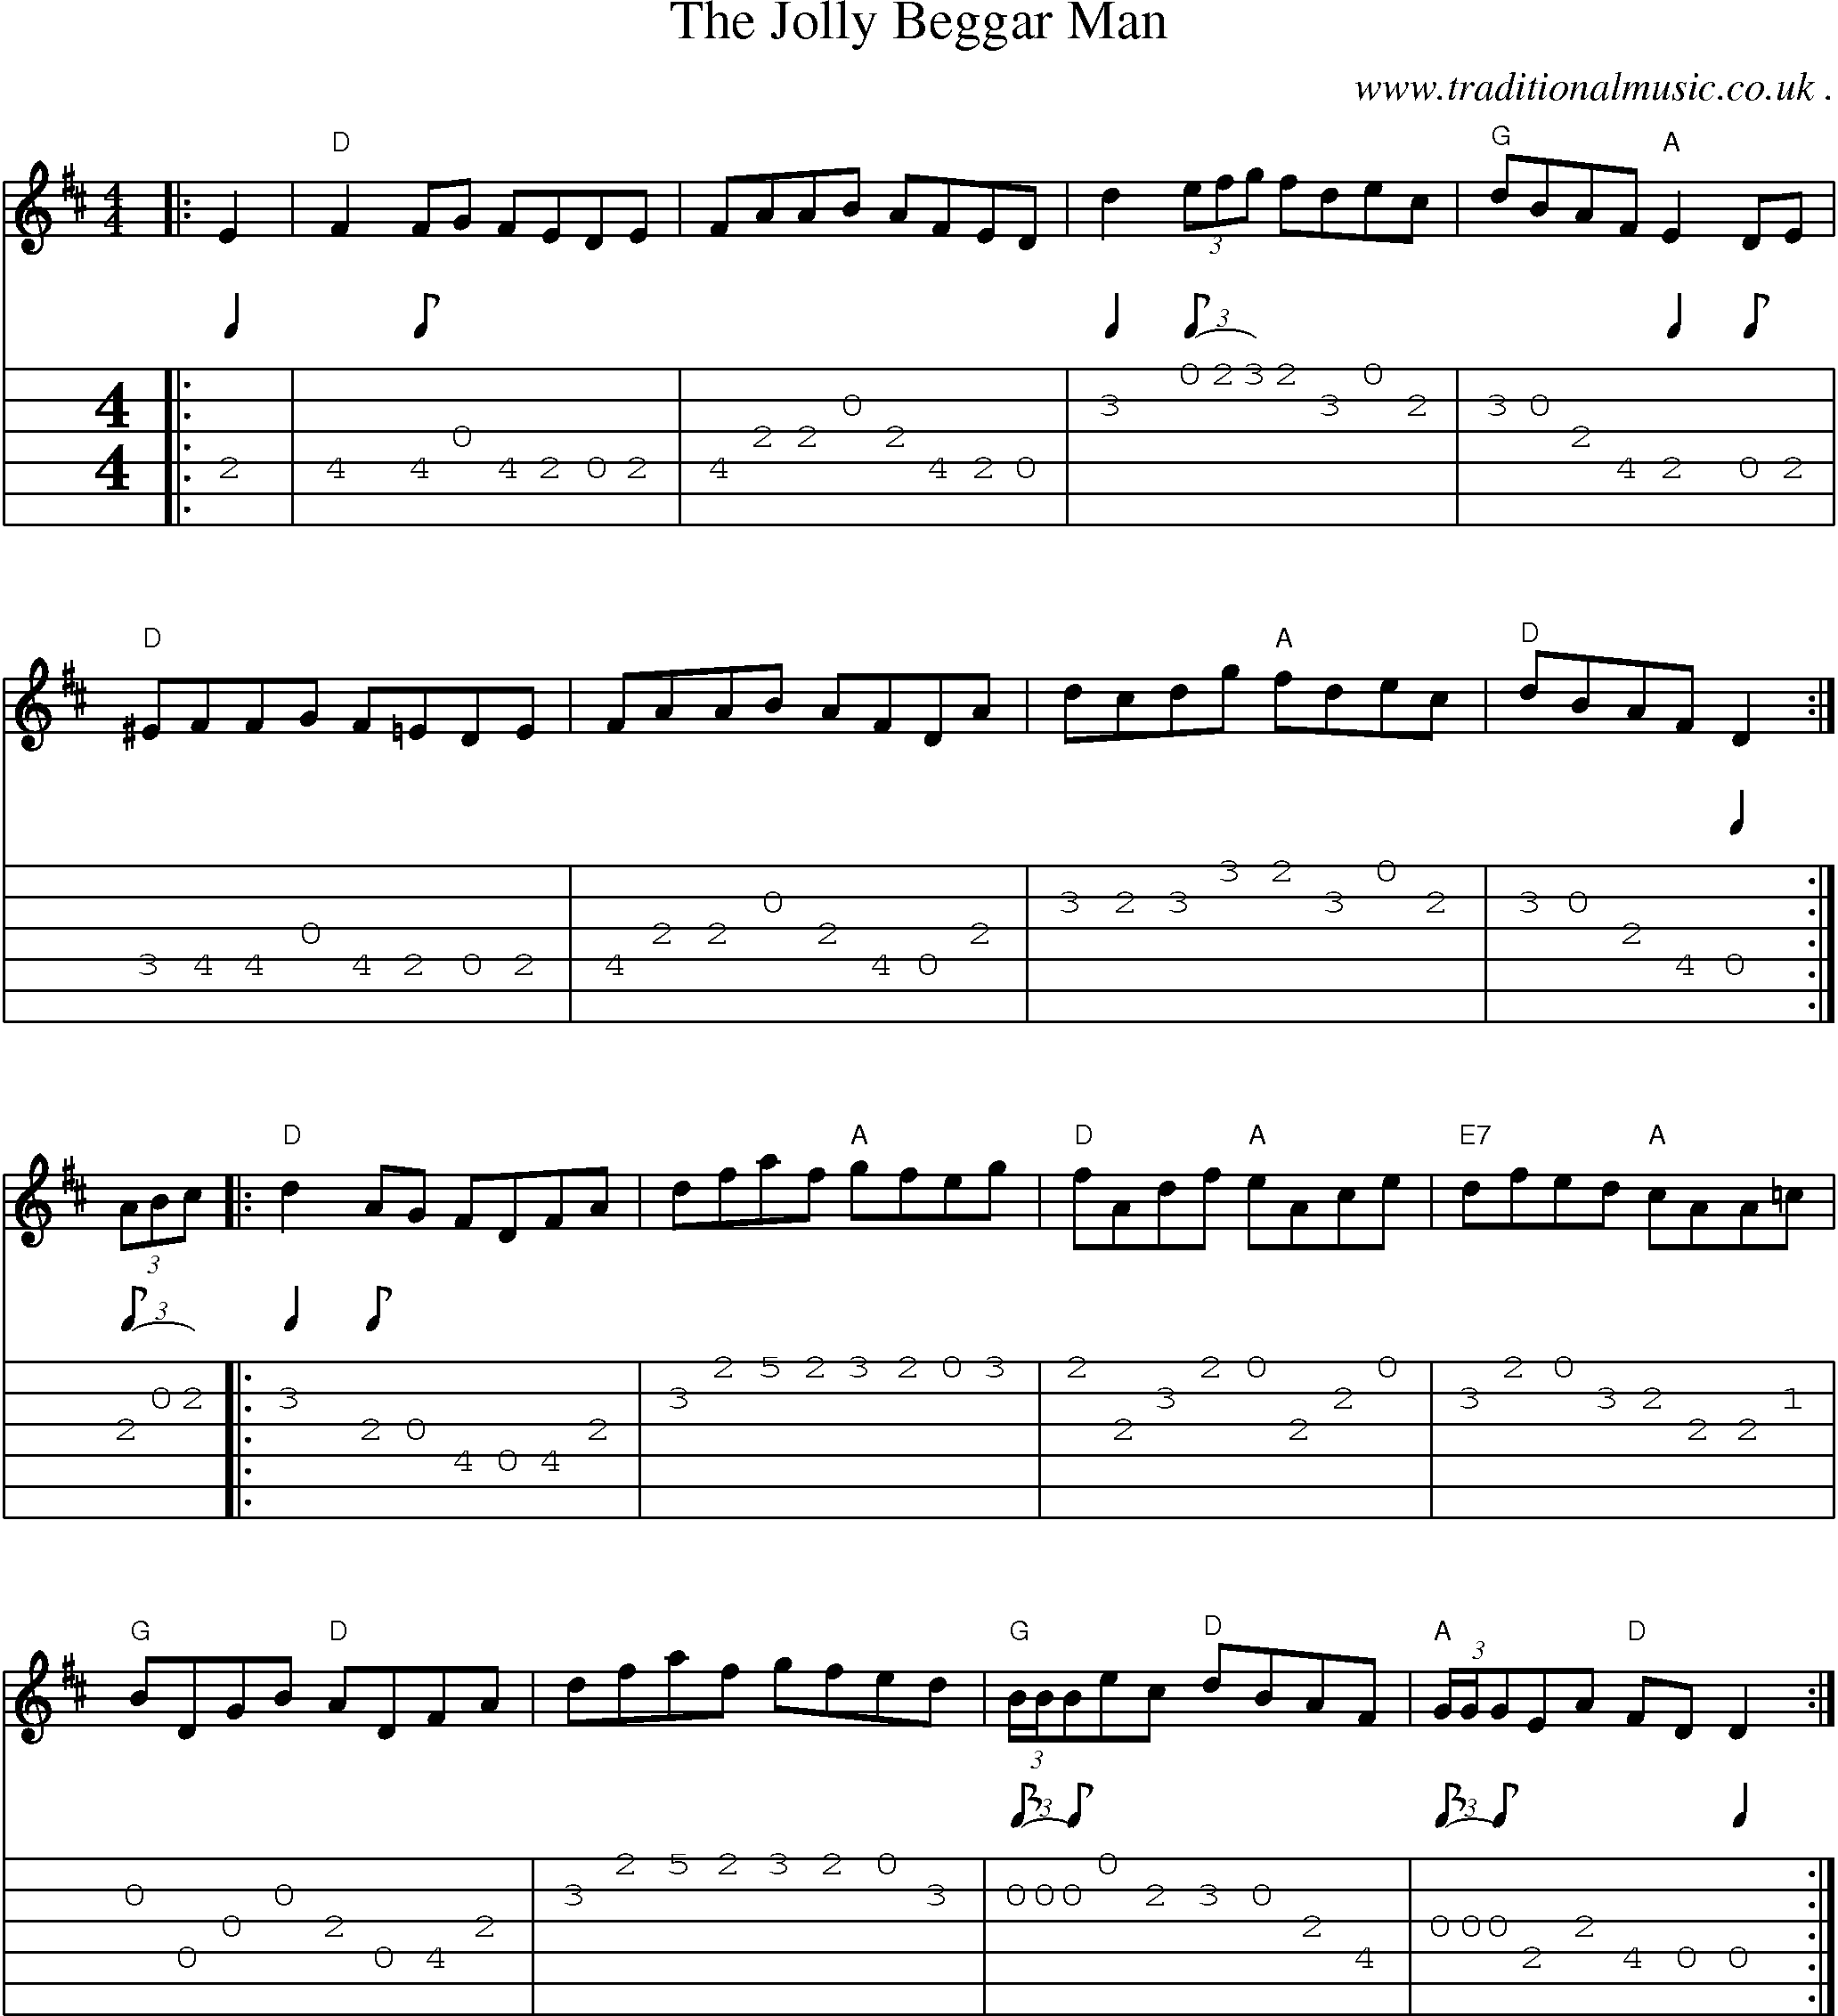 Music Score and Guitar Tabs for The Jolly Beggar Man